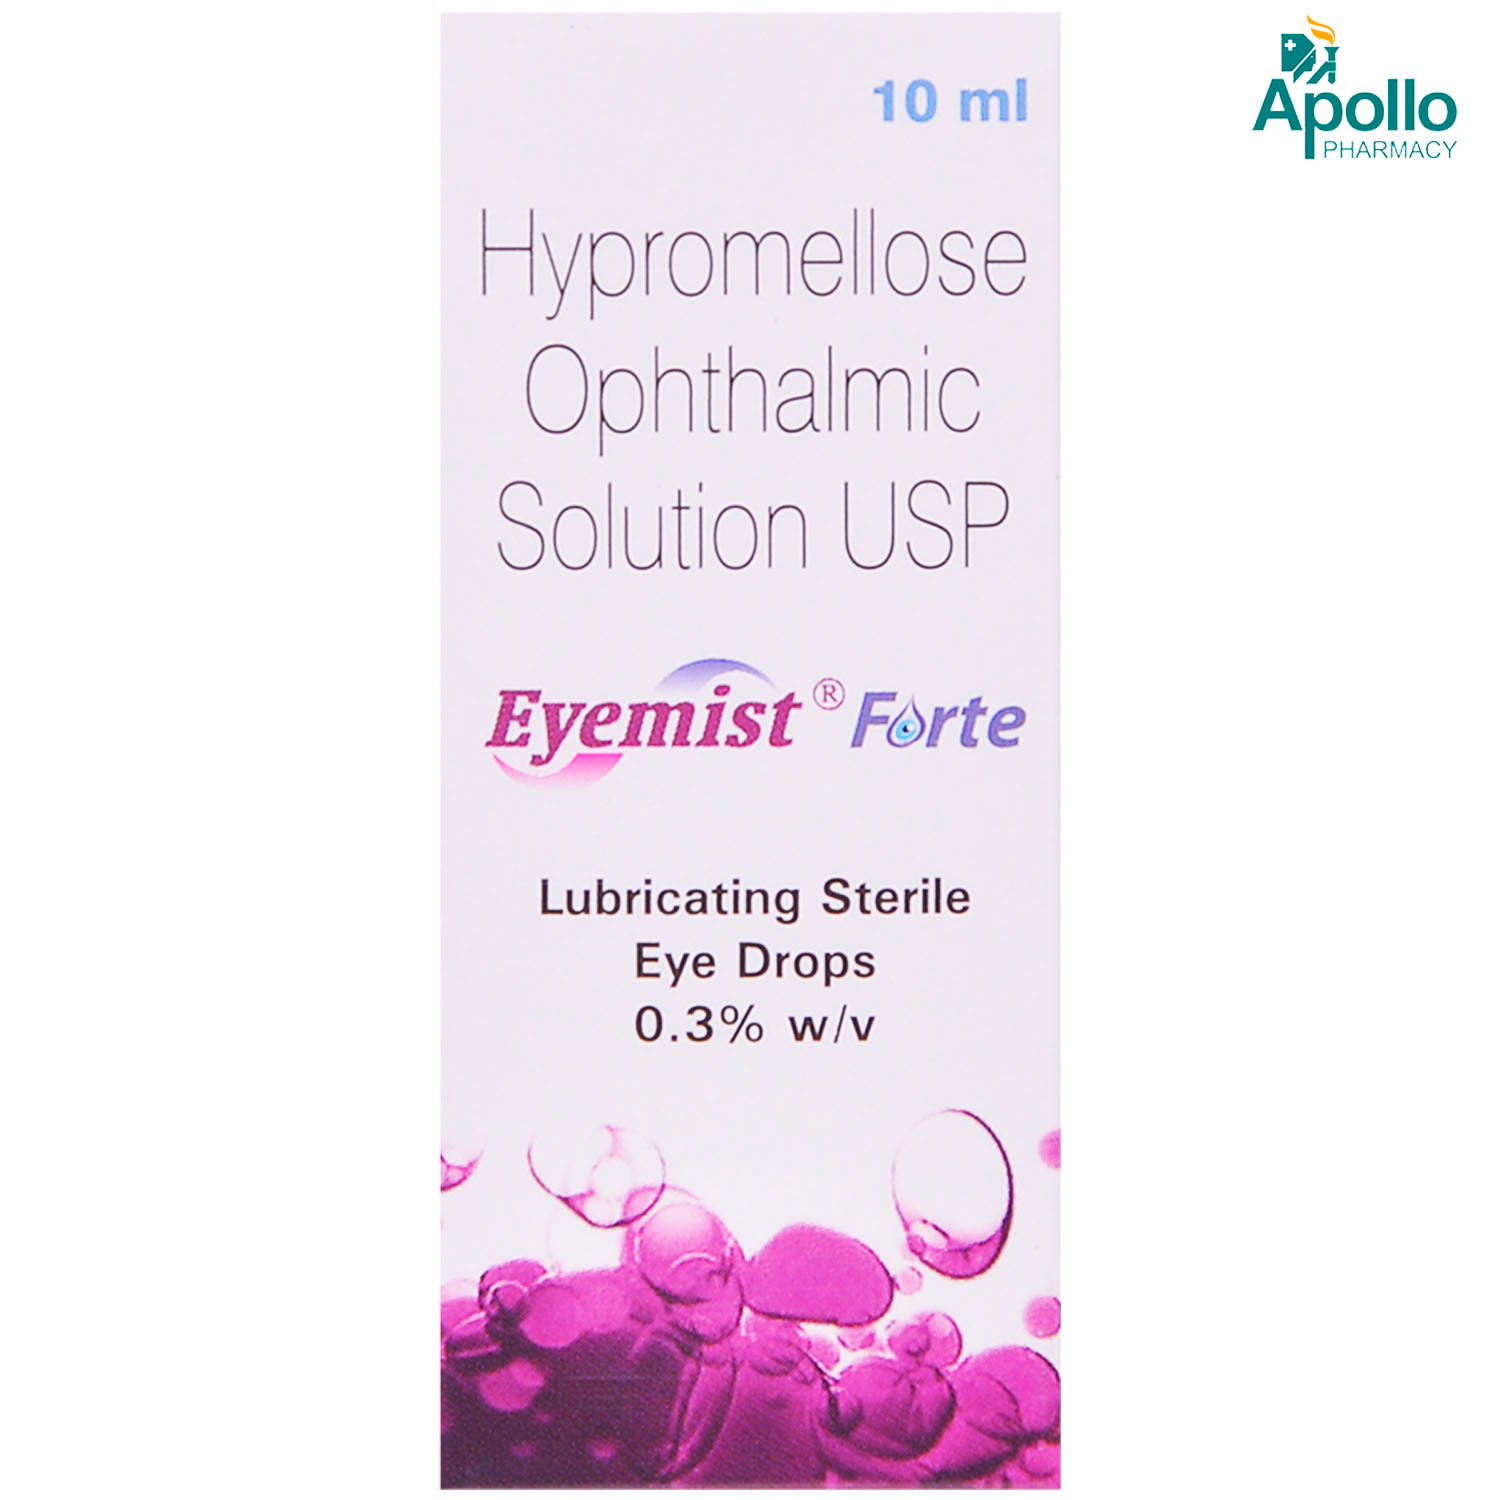 Eyemist Forte Eye Drops 10 ml Price, Uses, Side Effects, Composition